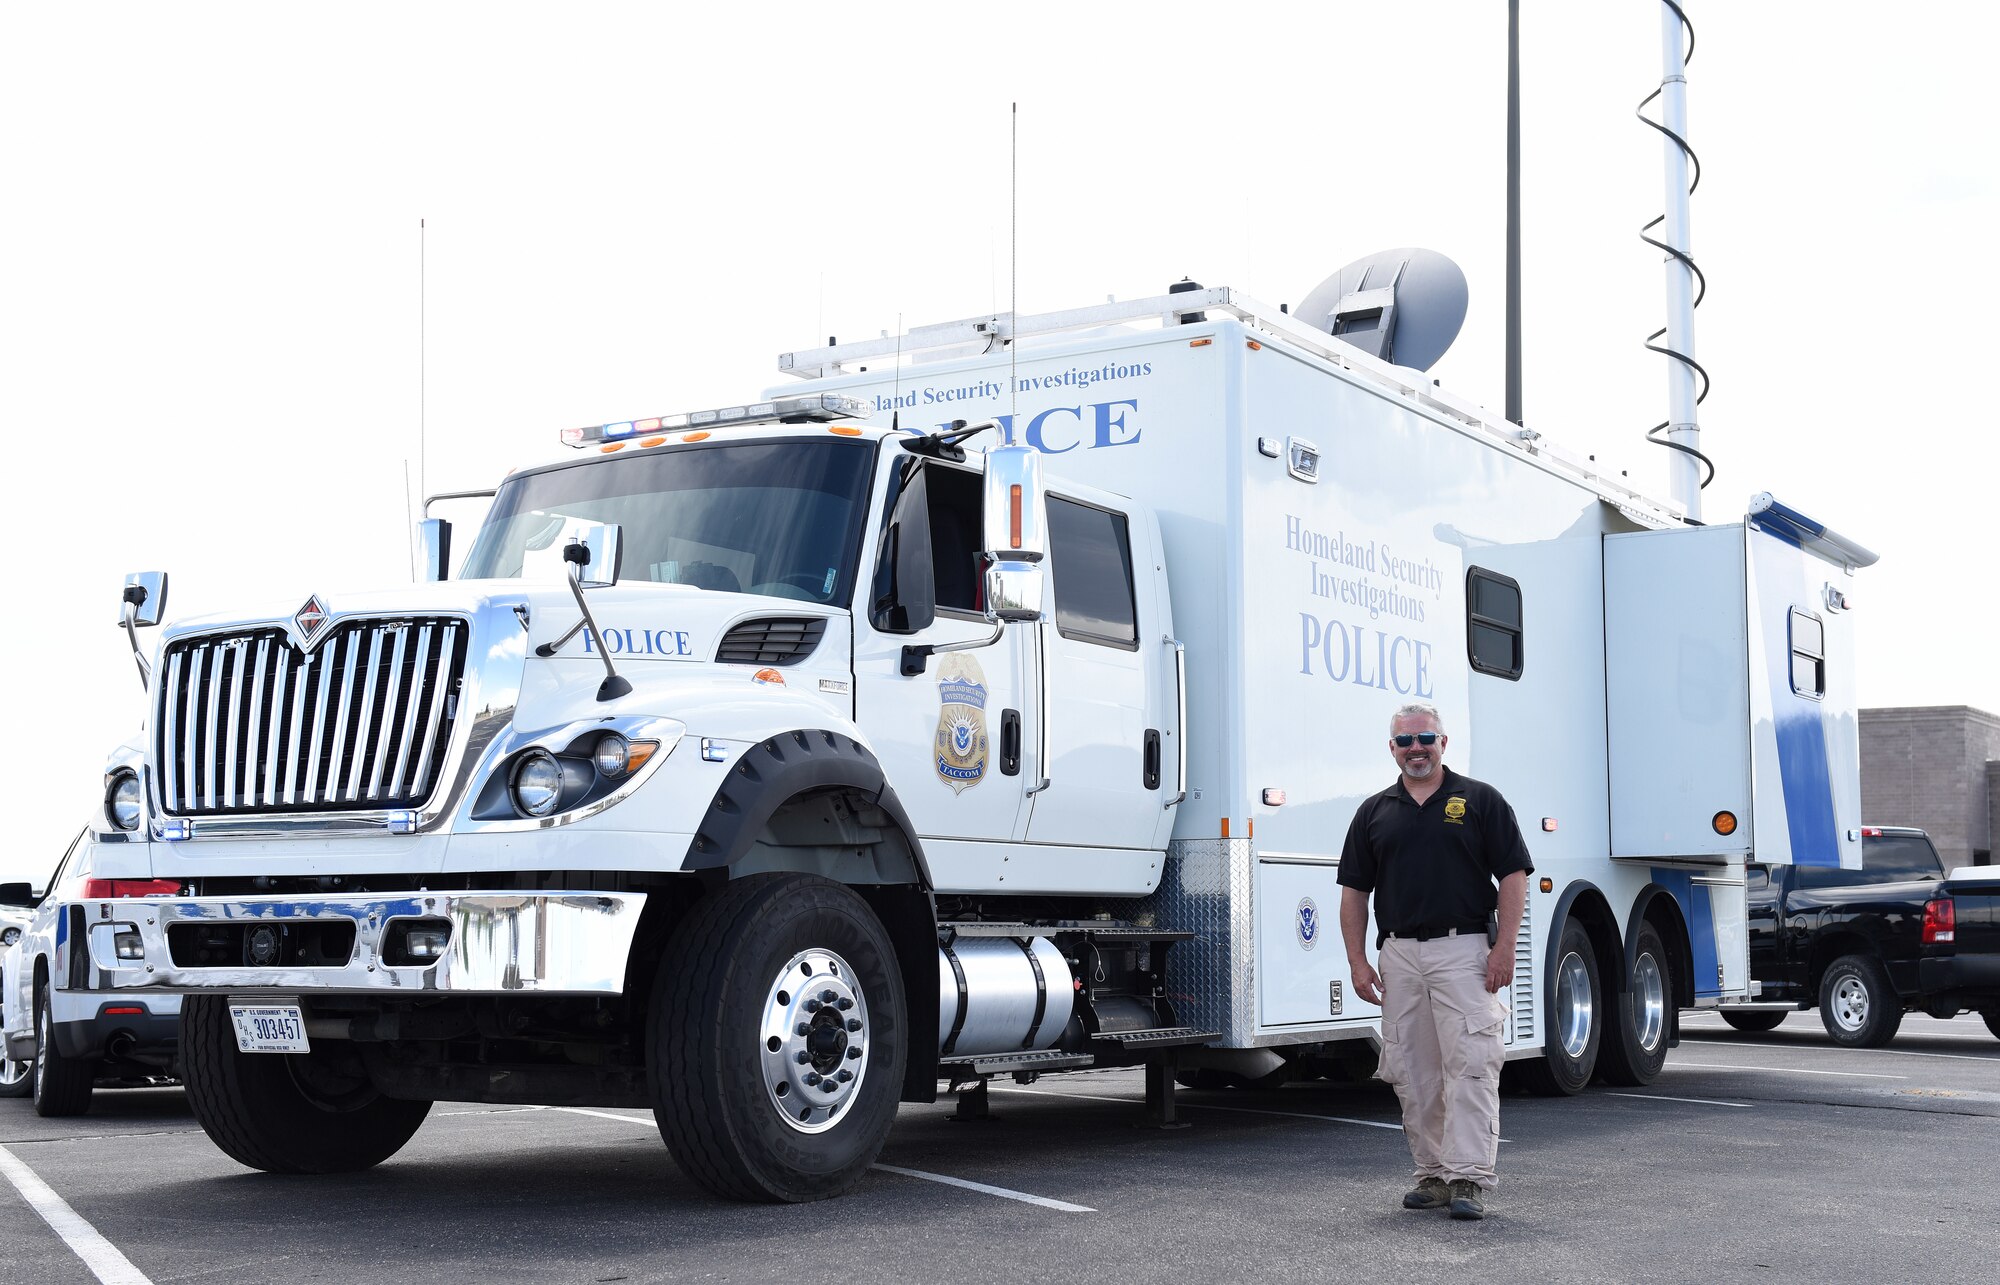 Jason Powers, U.S. Department of Homeland Security technical law enforcement officer, poses in front of a mobile command center vehicle during a Police Week demonstration at Buckley Air Force Base, Colorado, May 17, 2018.